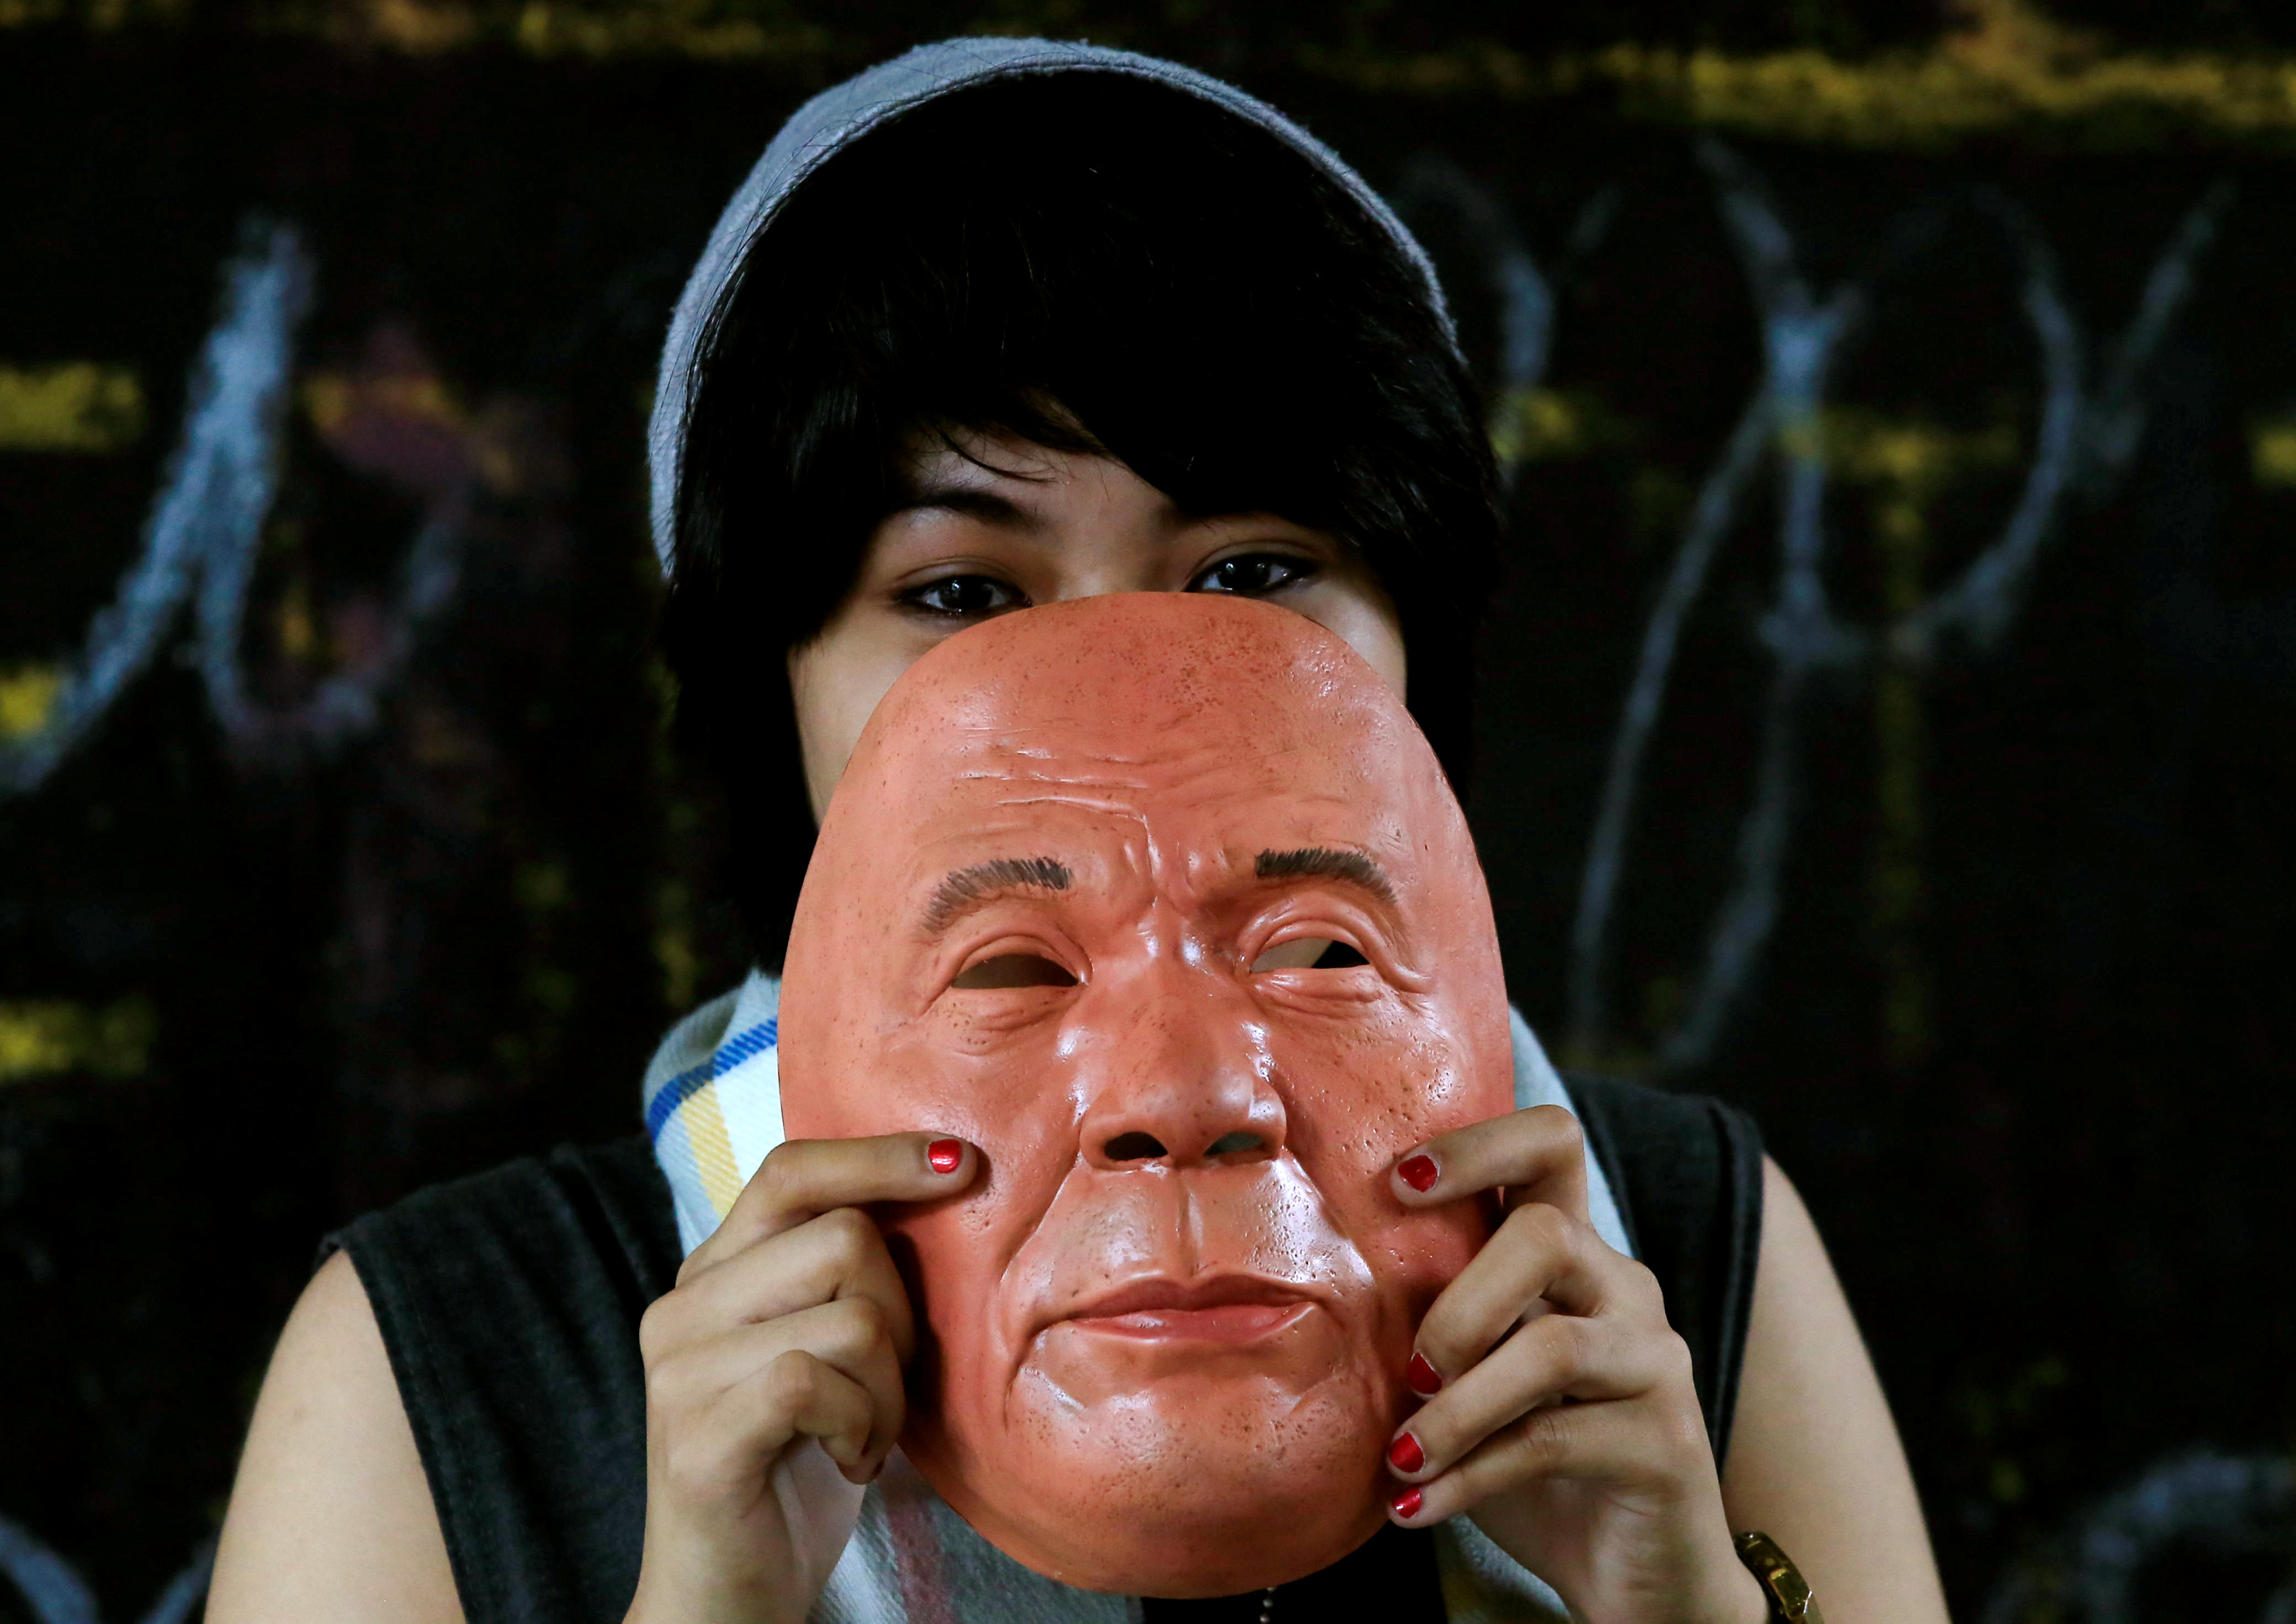 Duterte masks snapped up for Halloween in the Philippines